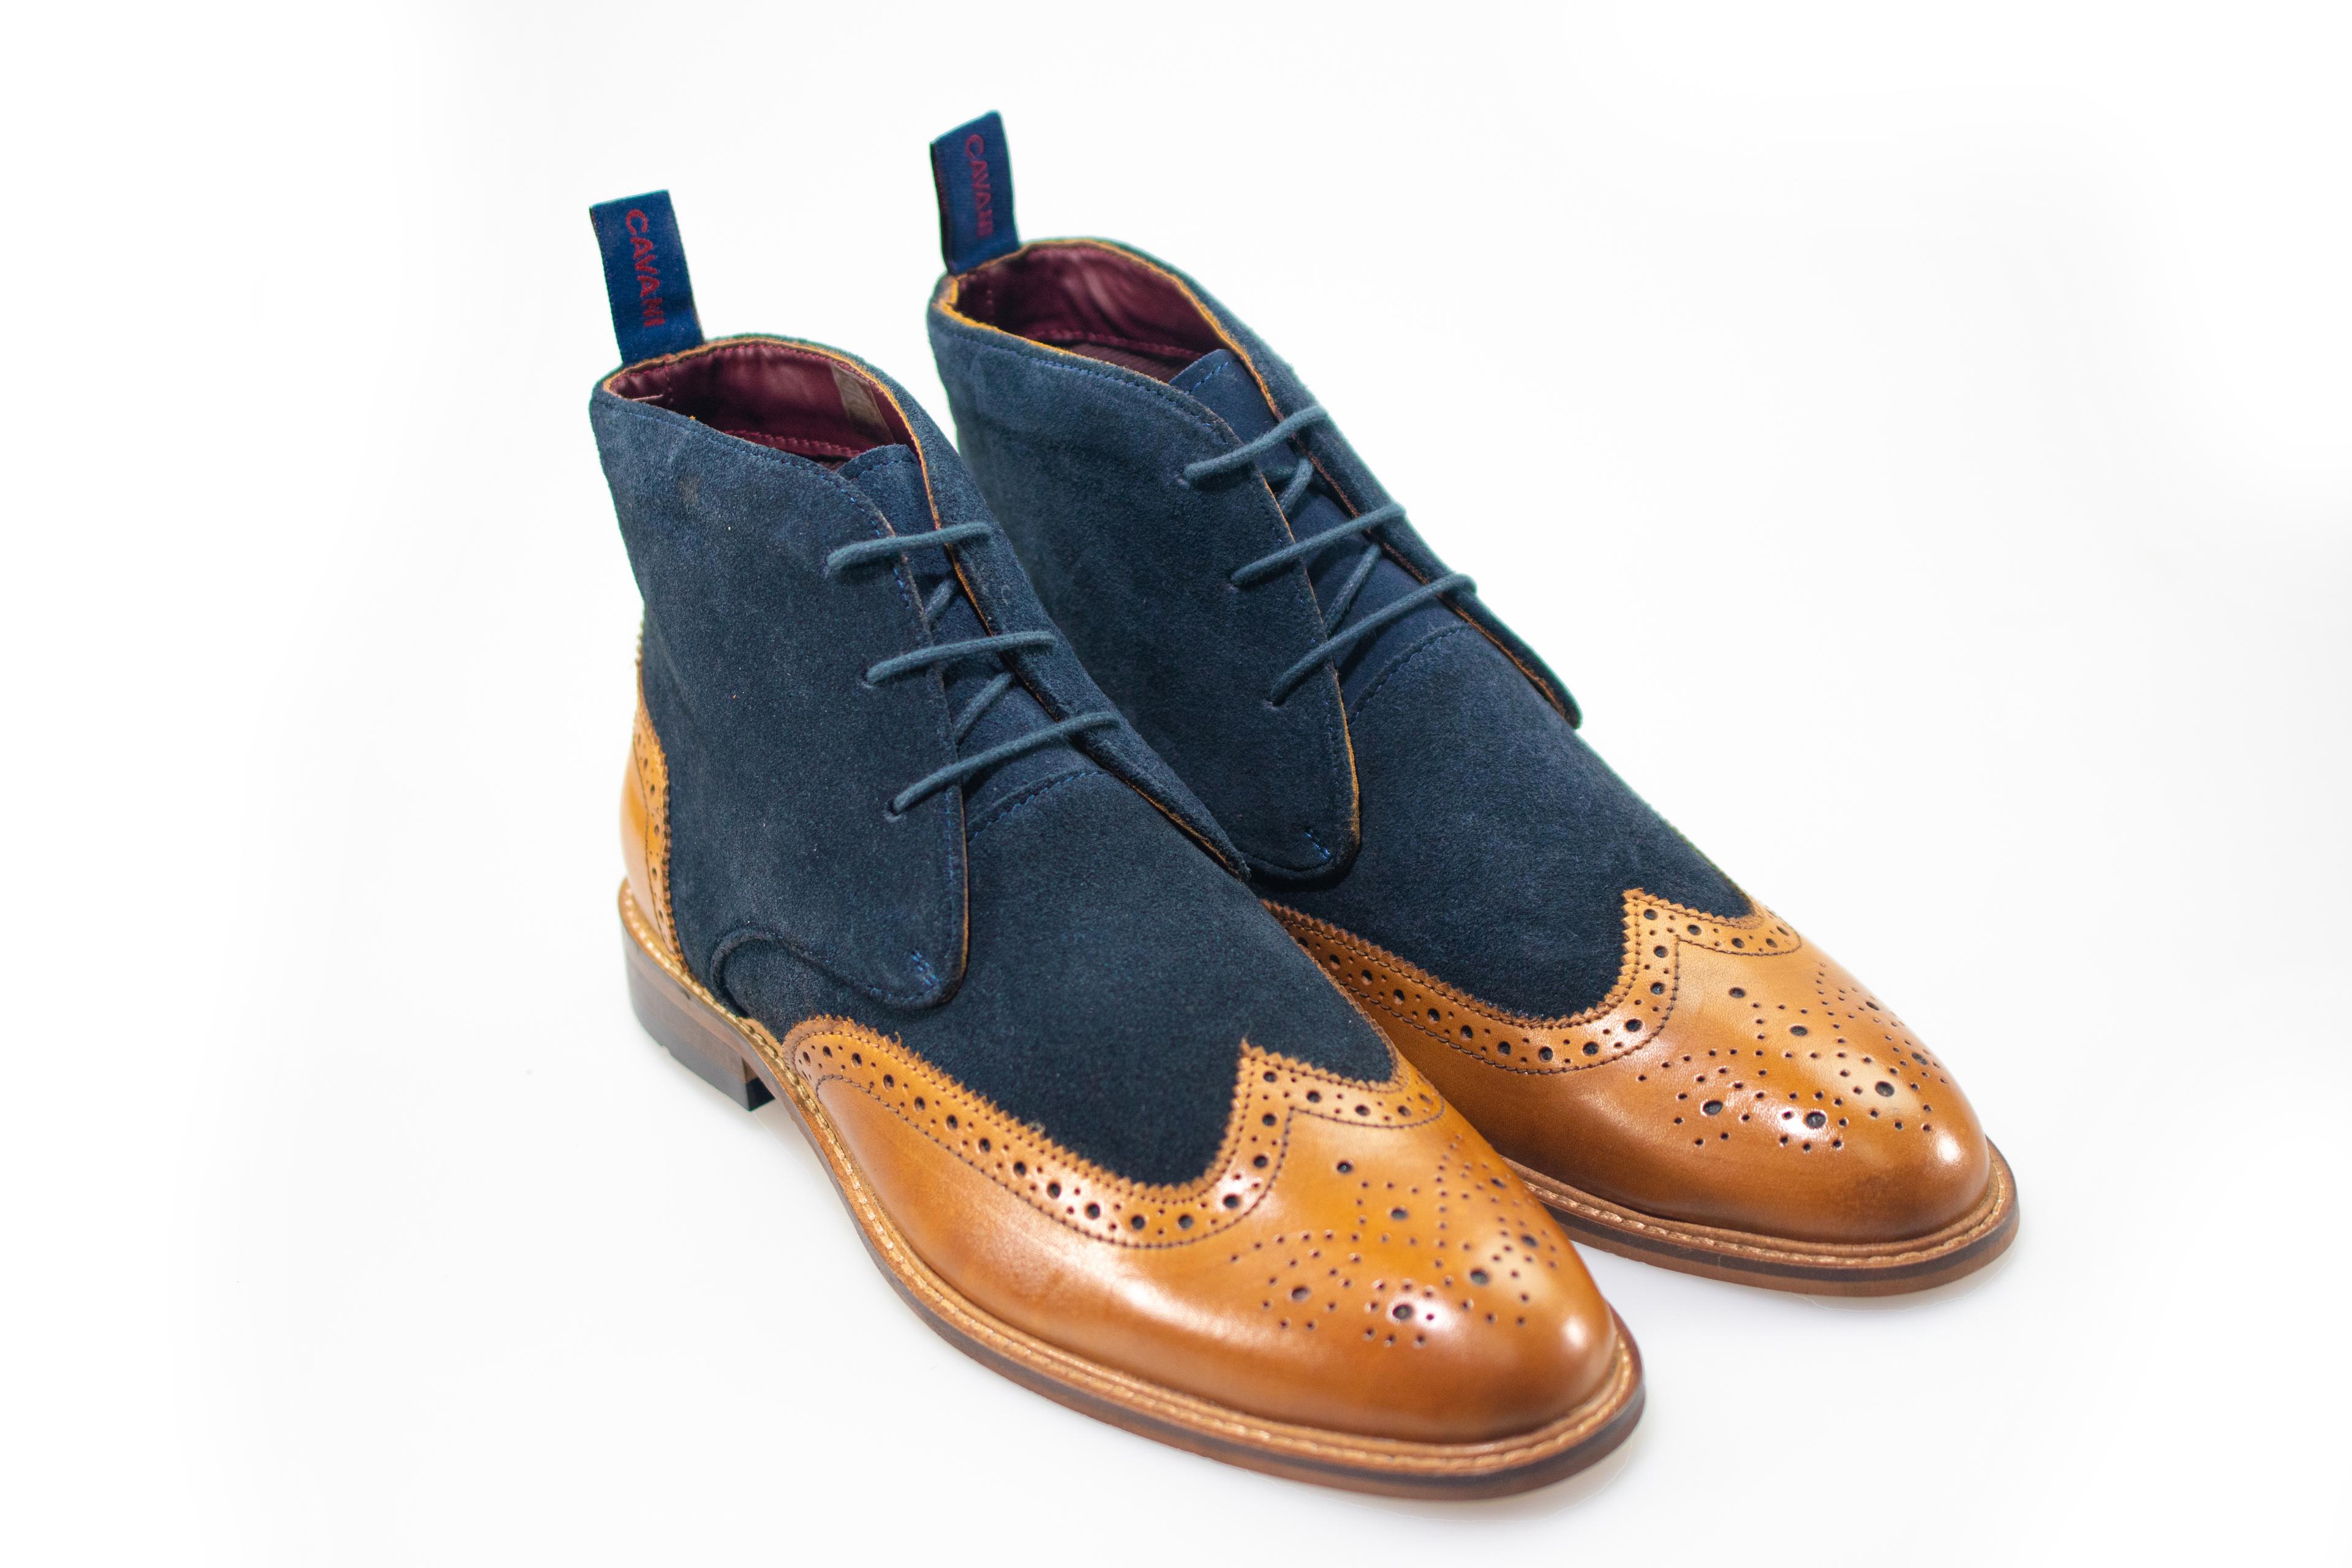 Men's Suede & Leather Brogue Boots - CONNICK